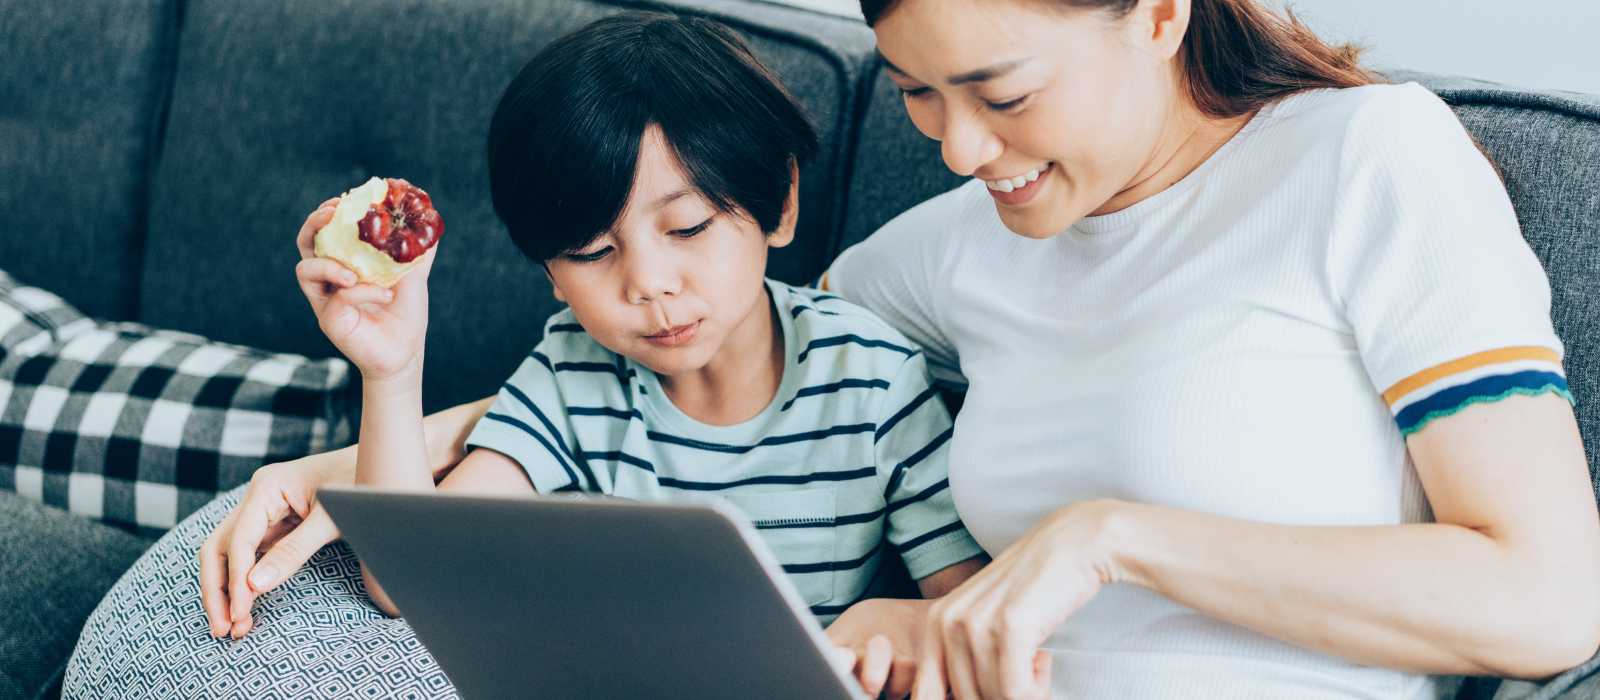 Raising Digital Natives: A mother’s journey in the age of information overload